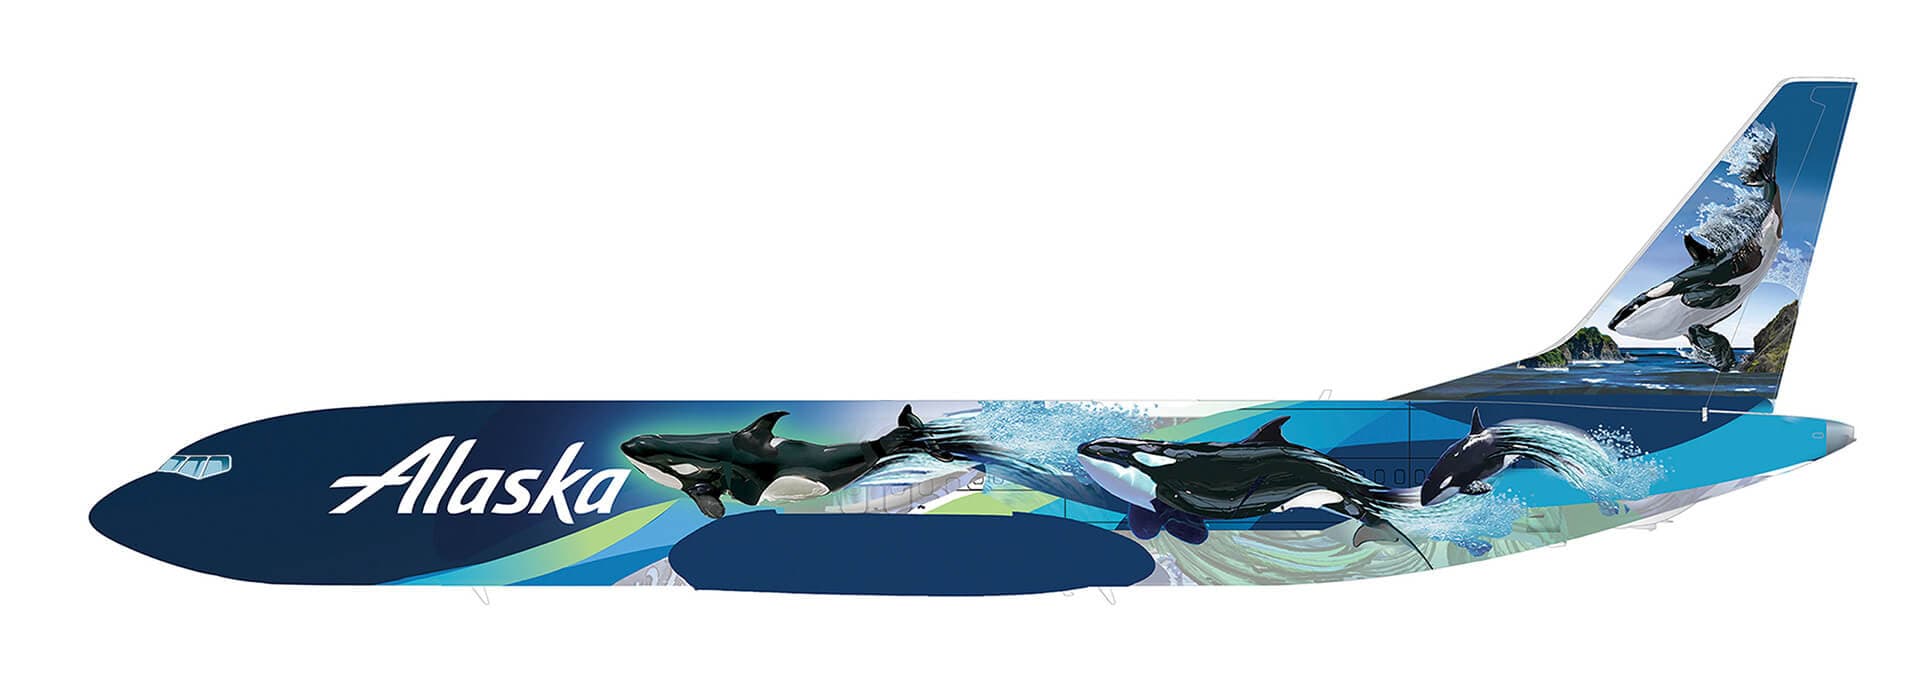 Alaska Airlines 737 orca livery design concept pacific northwest orcas